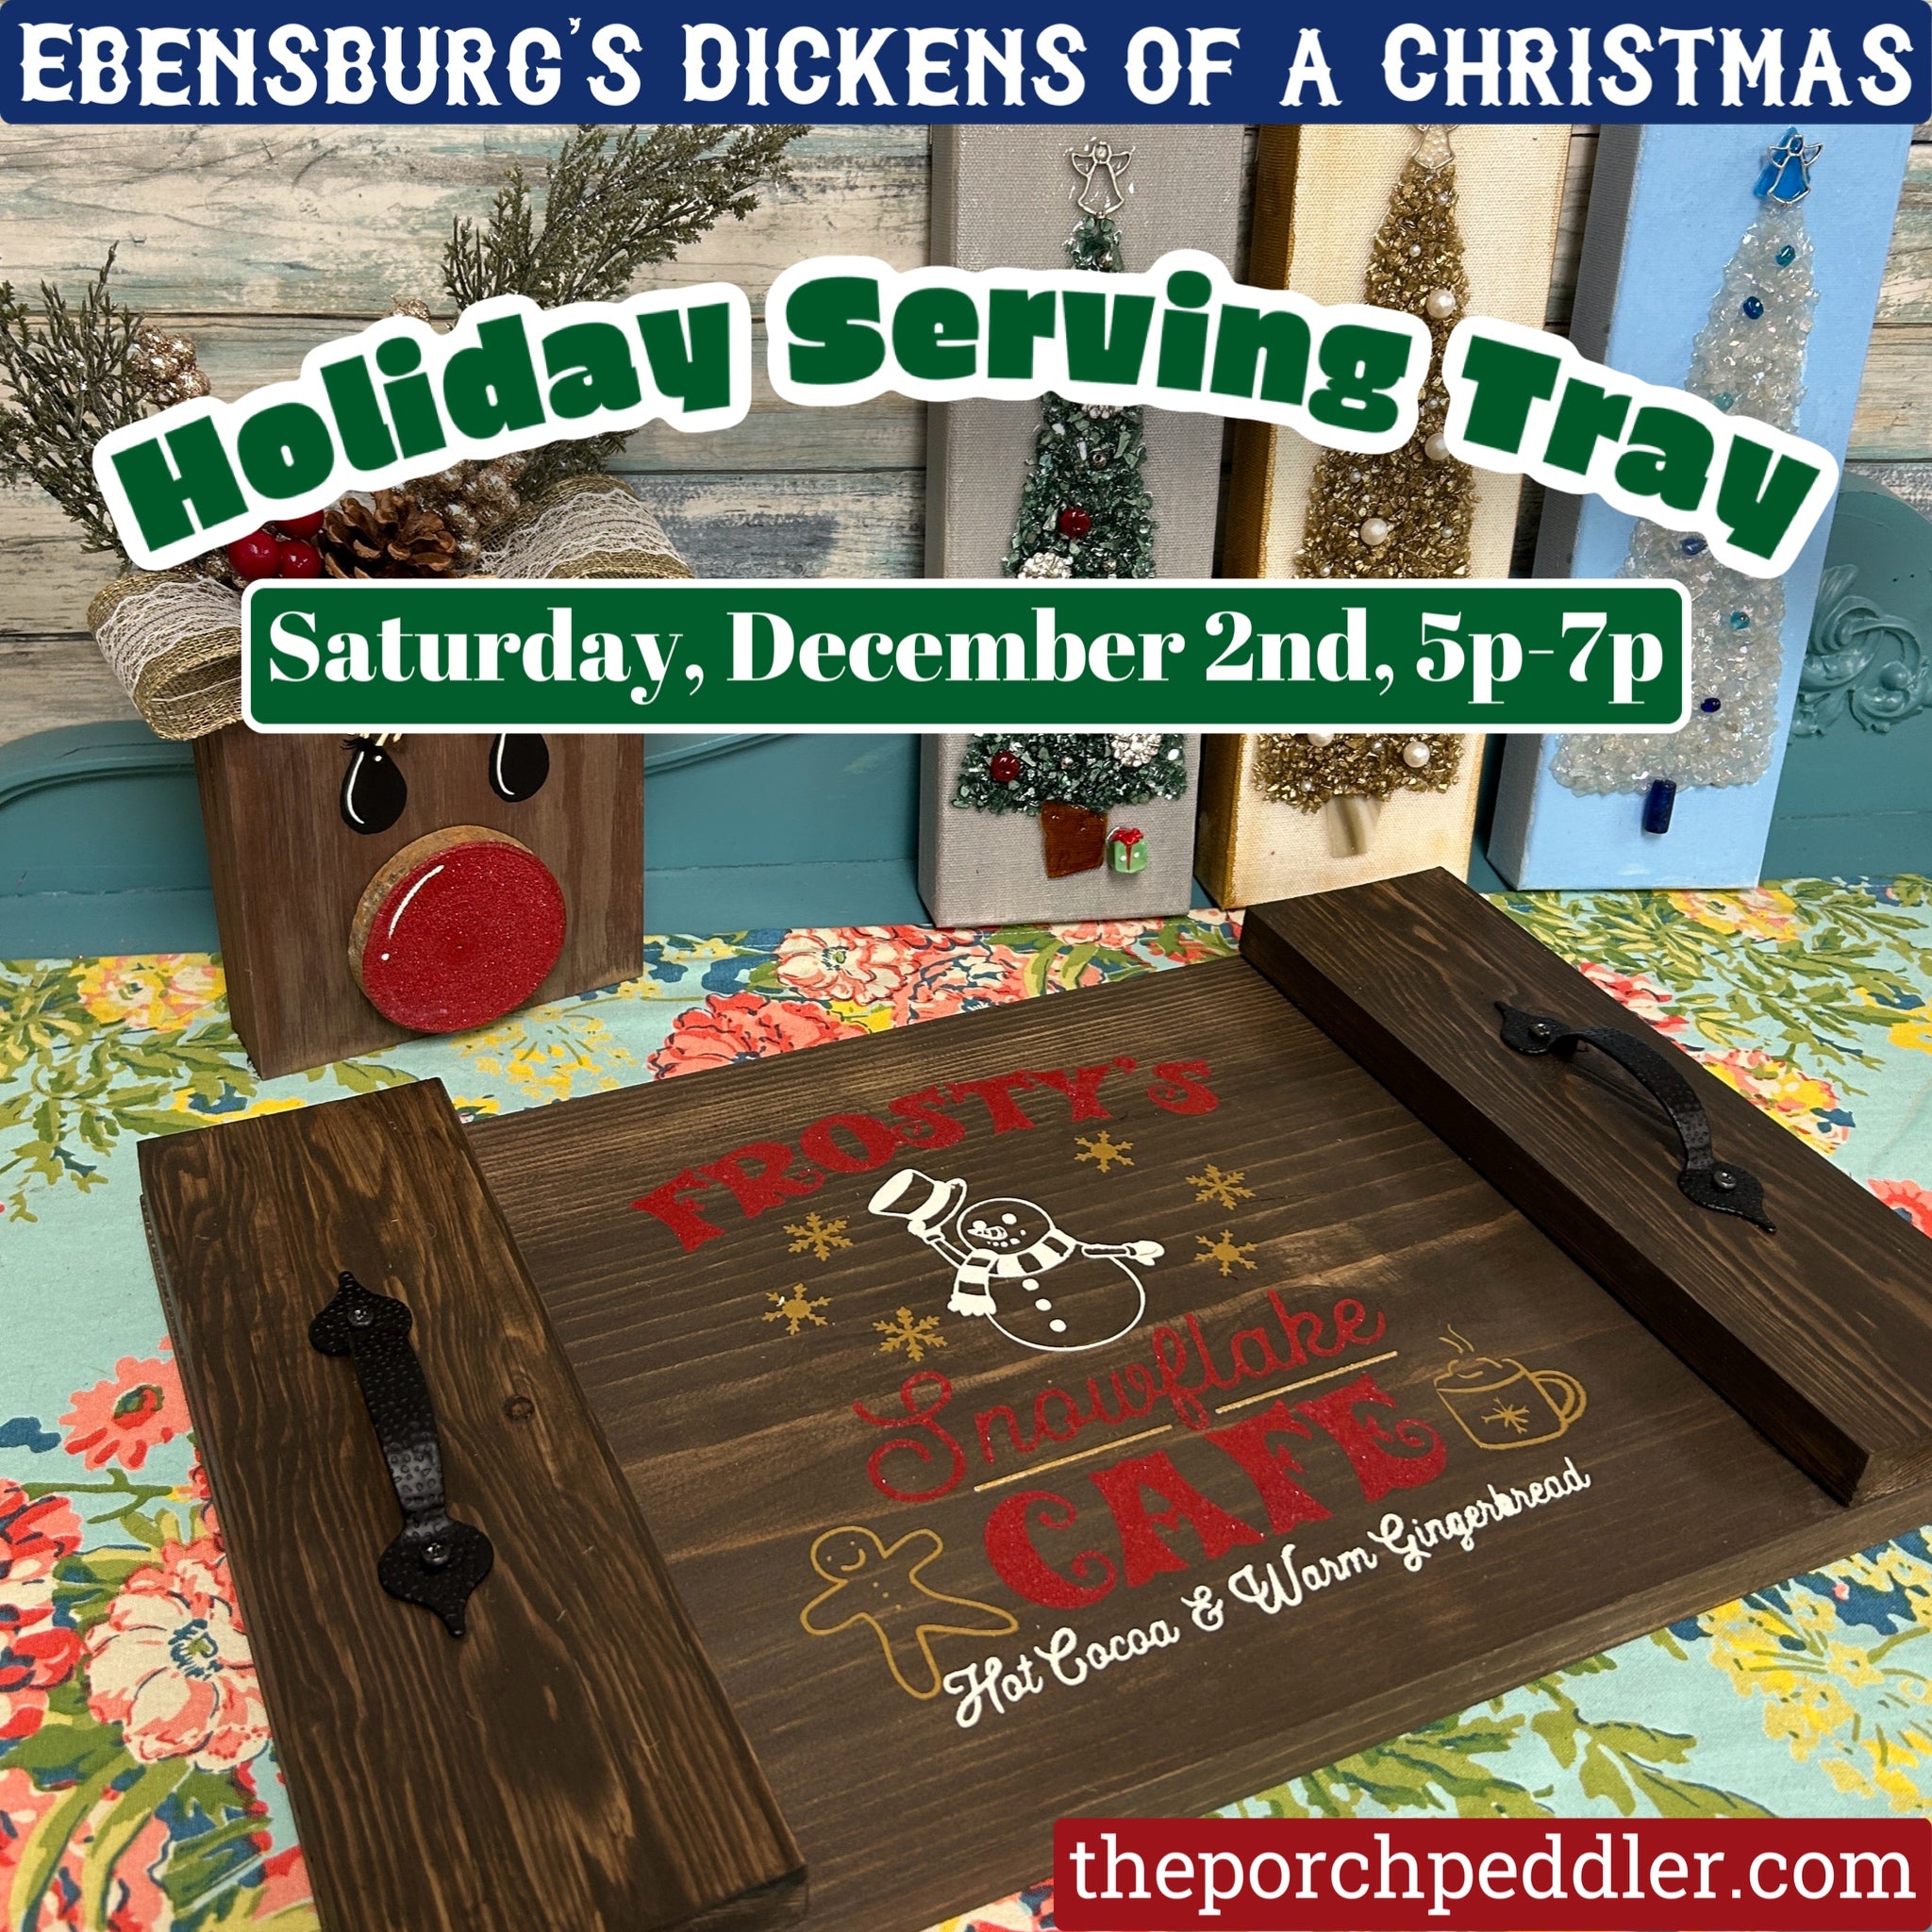 "Dickens of a Christmas" December 2nd - Holiday Serving Tray (5p-7p)